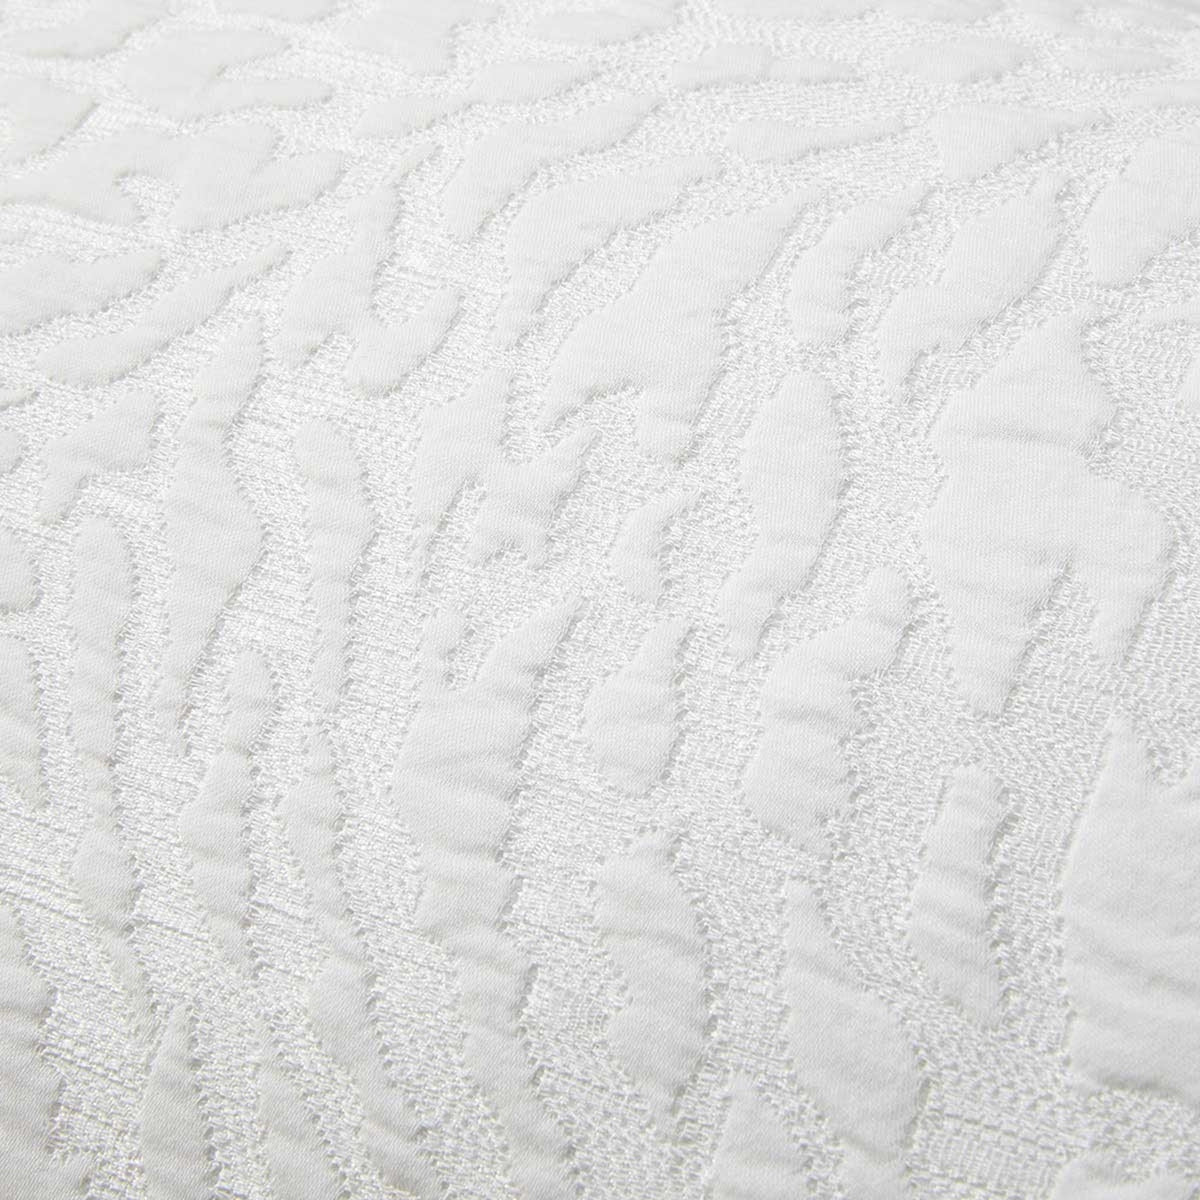 Swatch Sample of Yves Delorme Souvenir Coverlet in Color Blanc